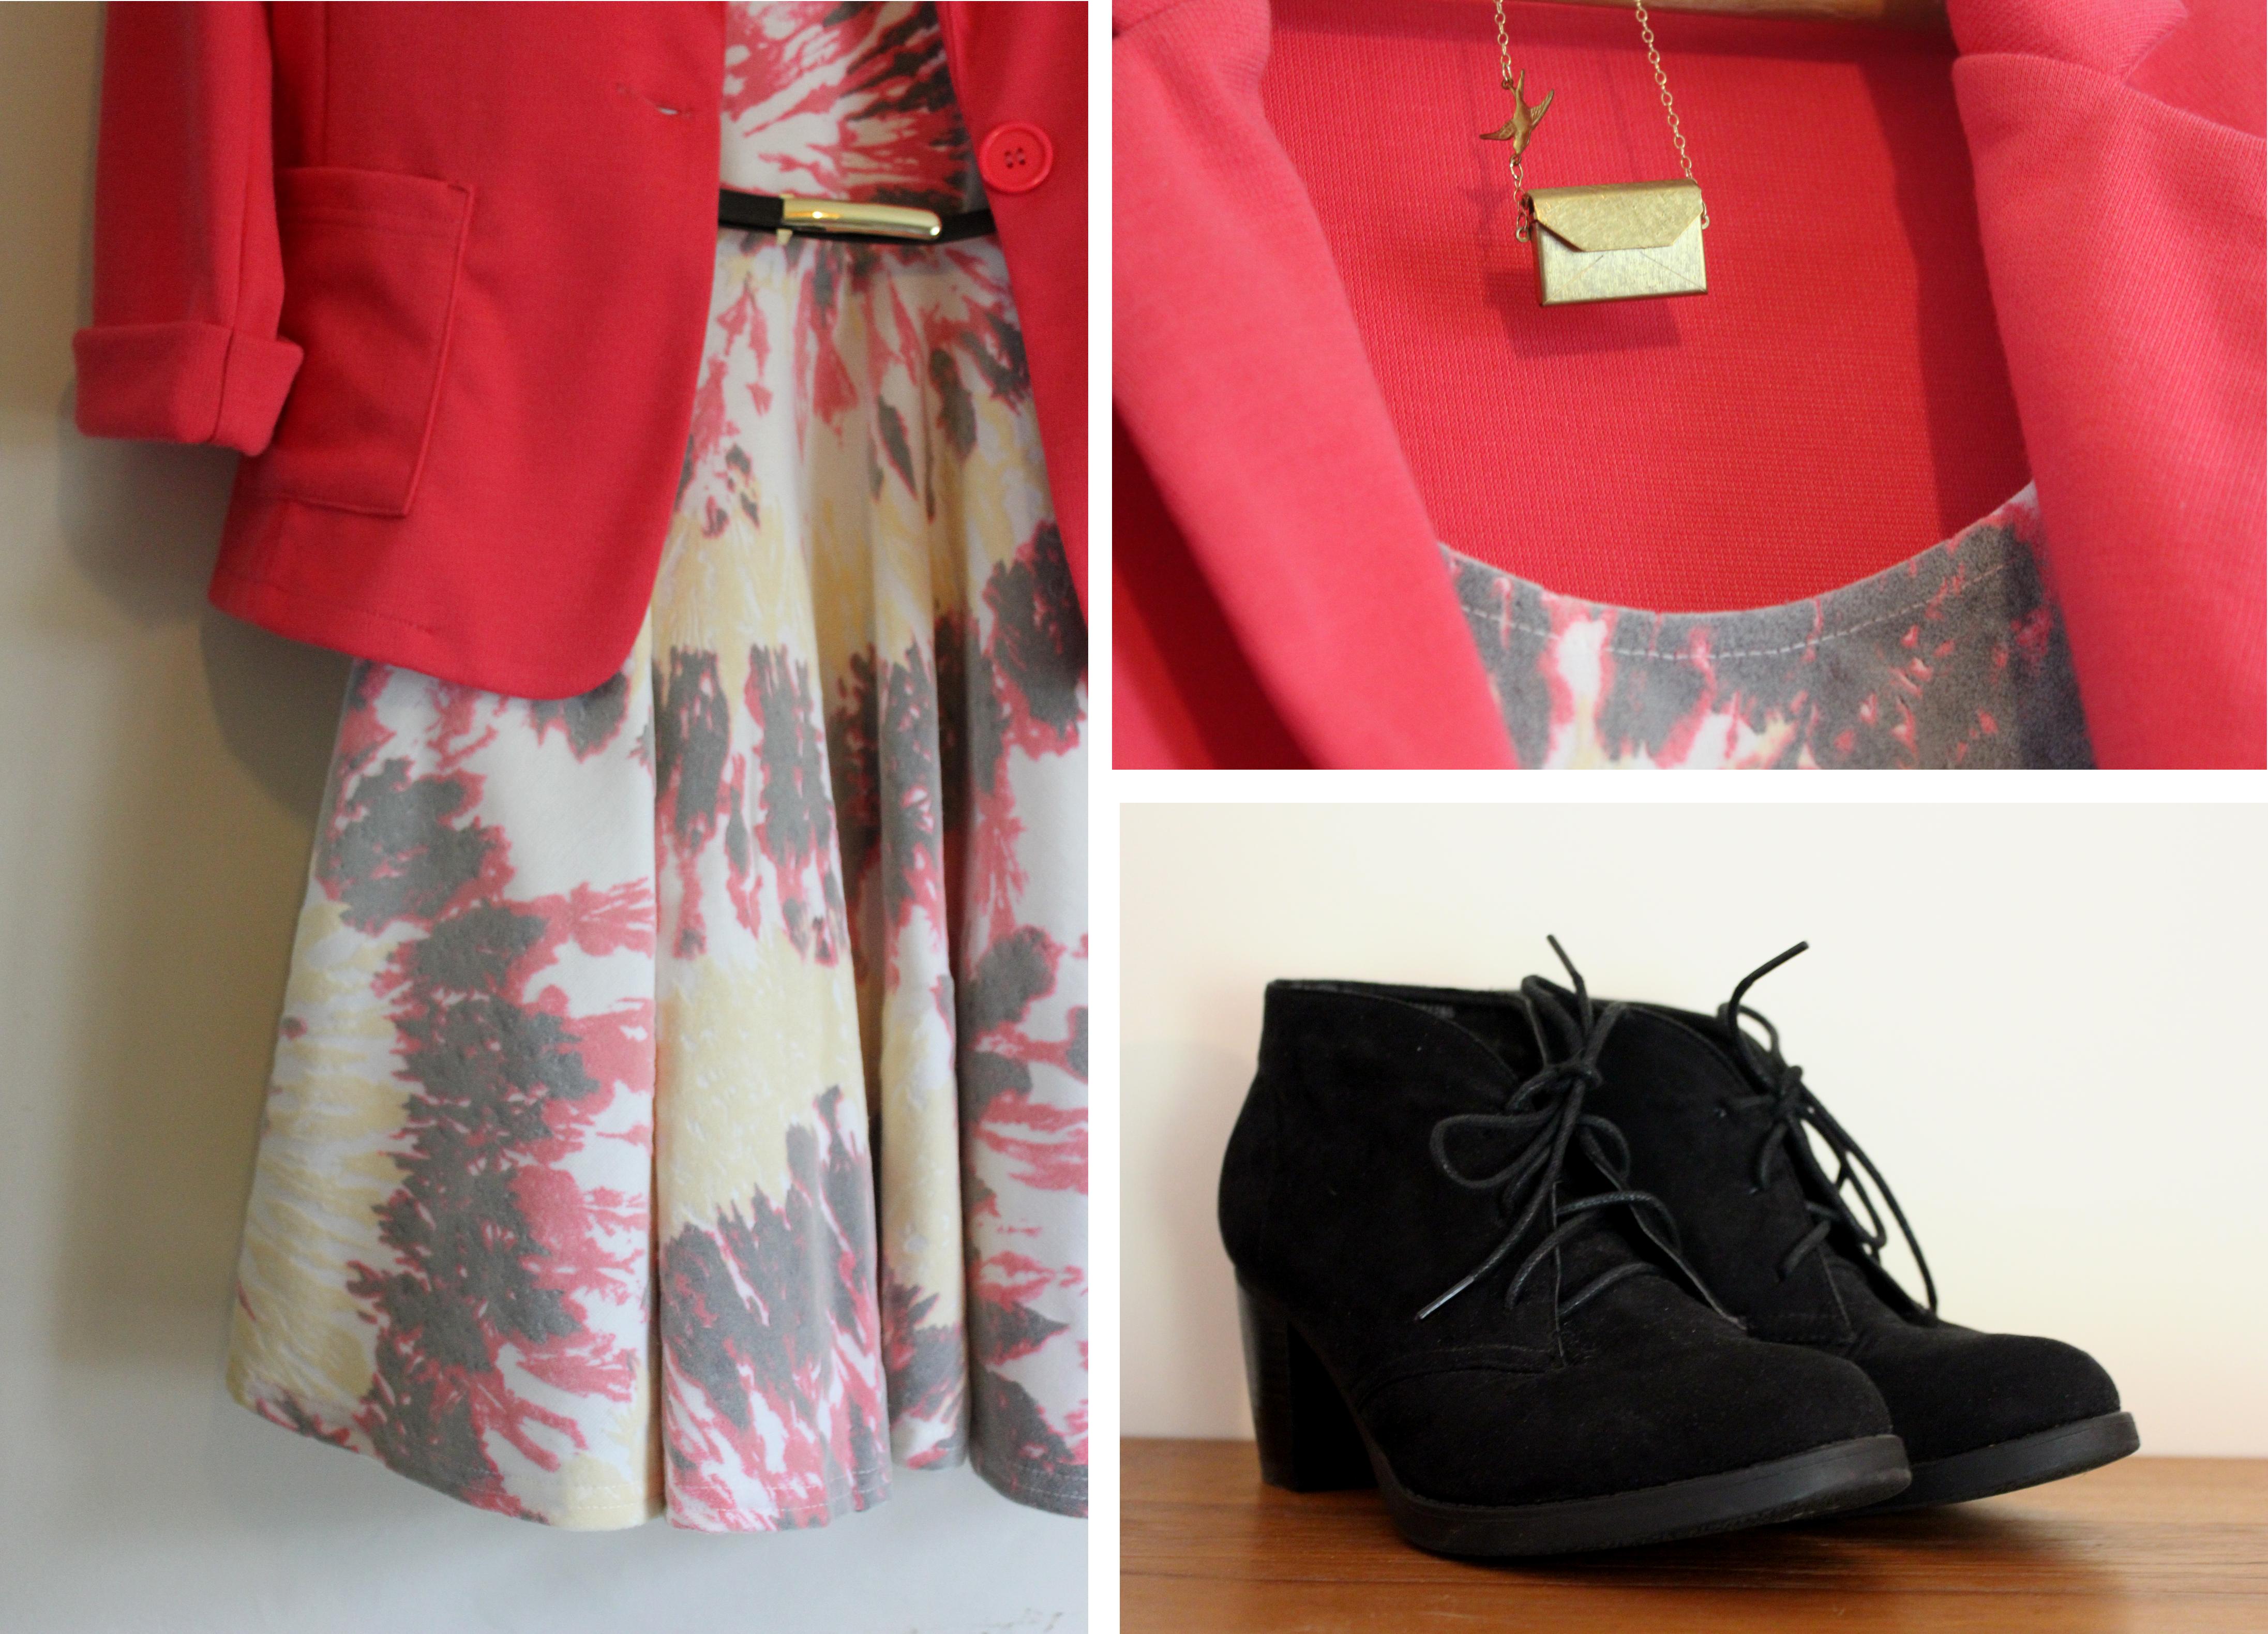 Cassiefairy outfit for style blogger awards from Apricot and New Look